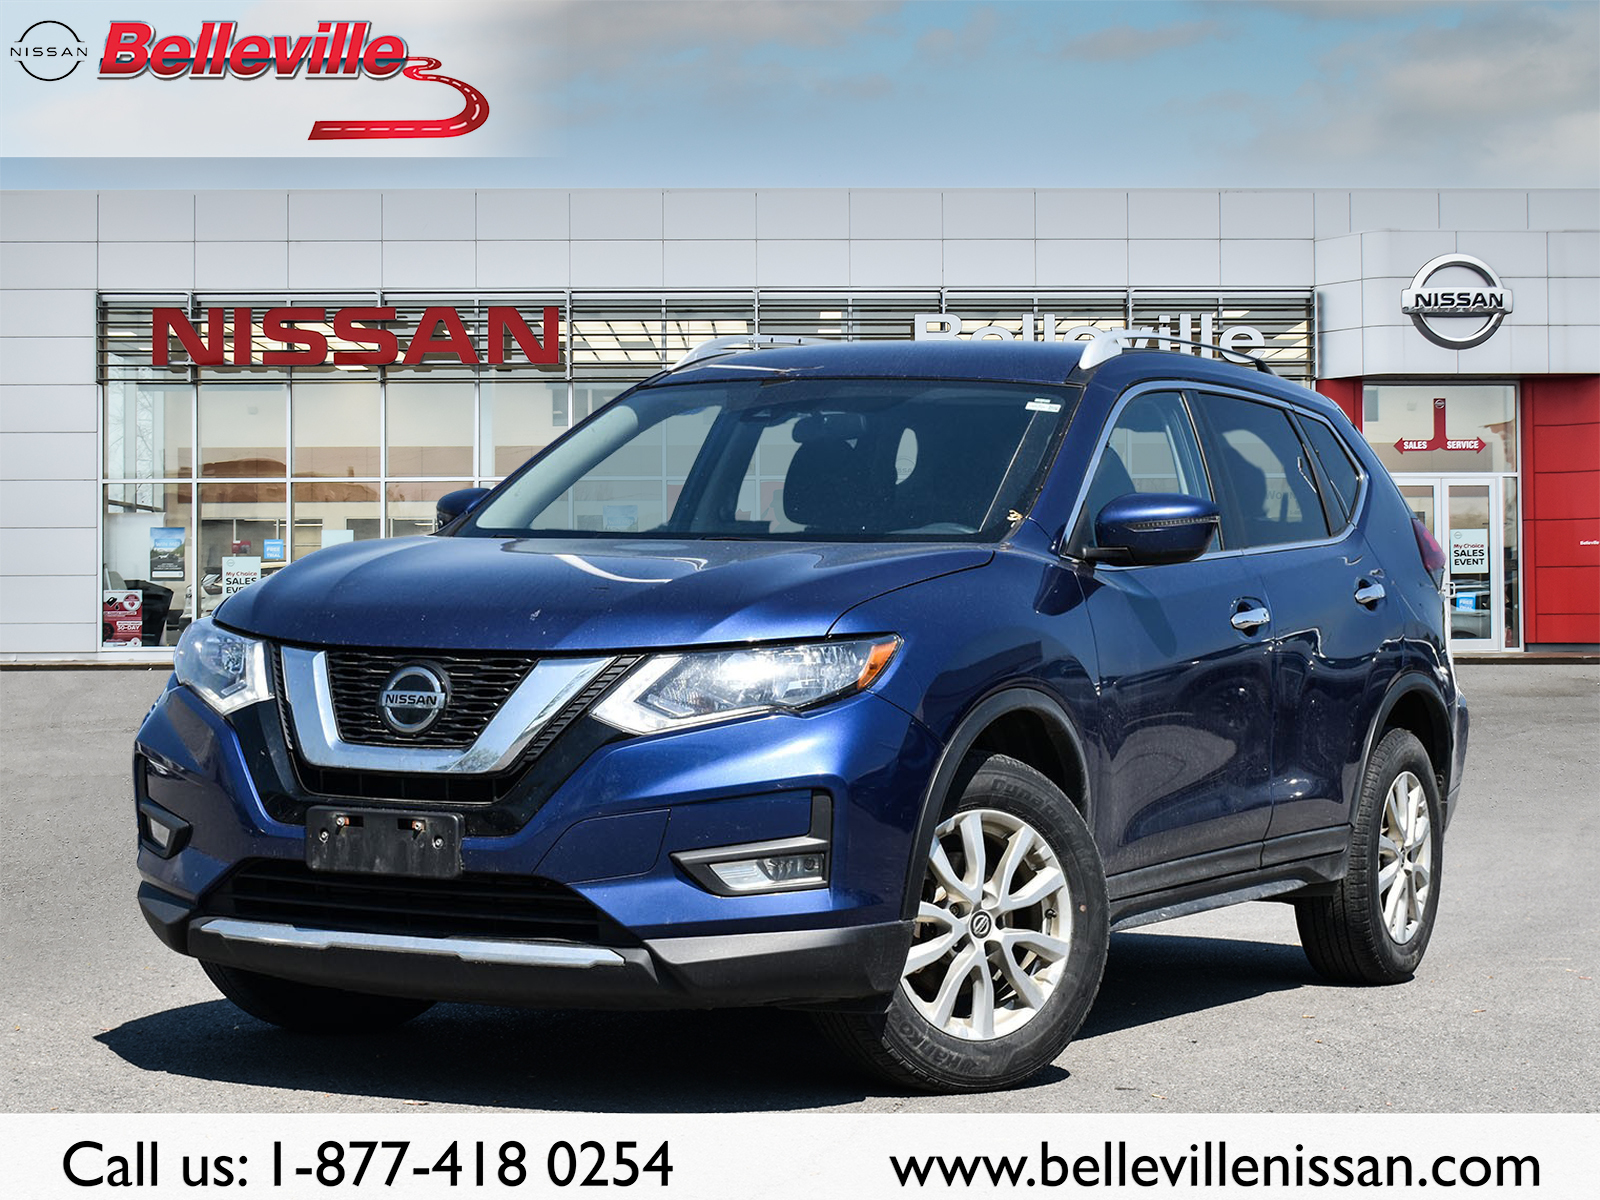 2020 Nissan Rogue SV AWD HEATED SEATS, REMOTE START, ONE OWNER